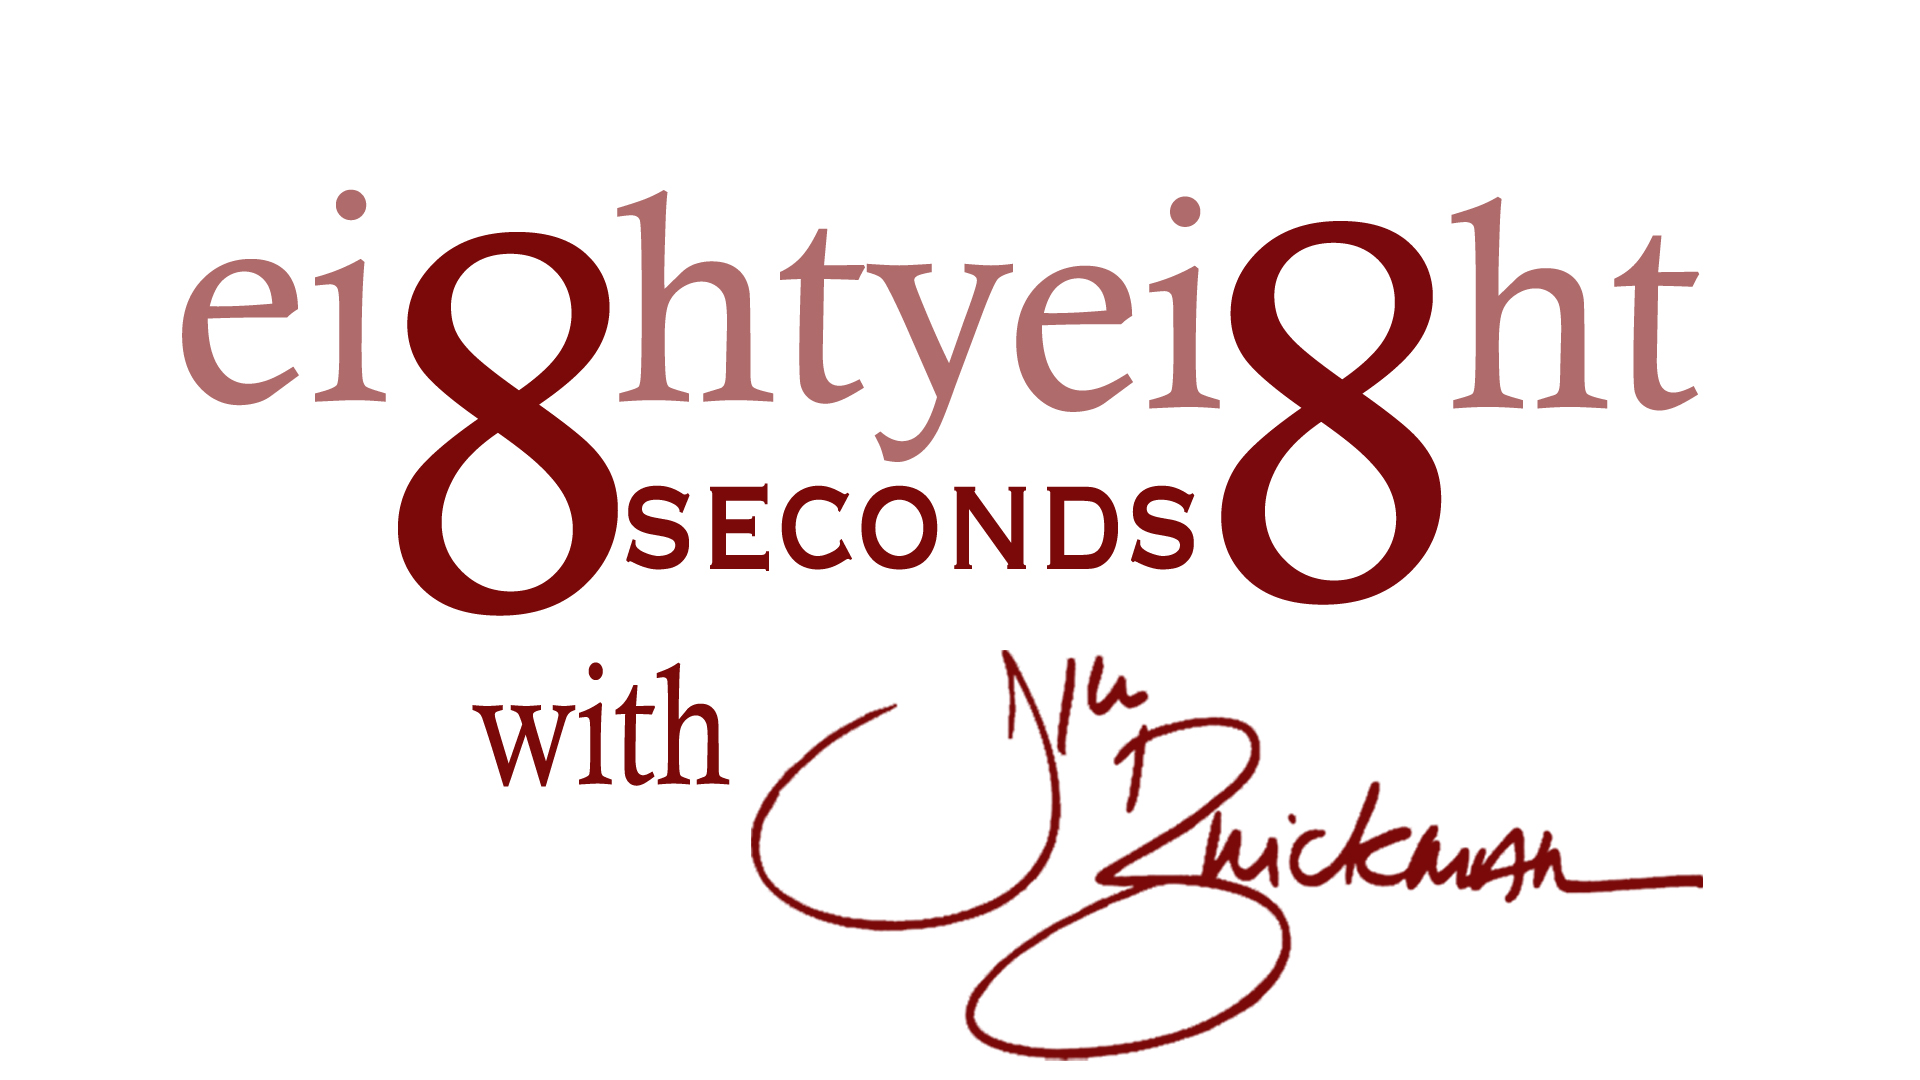 88 Seconds with Jim Brickman-Leap Day